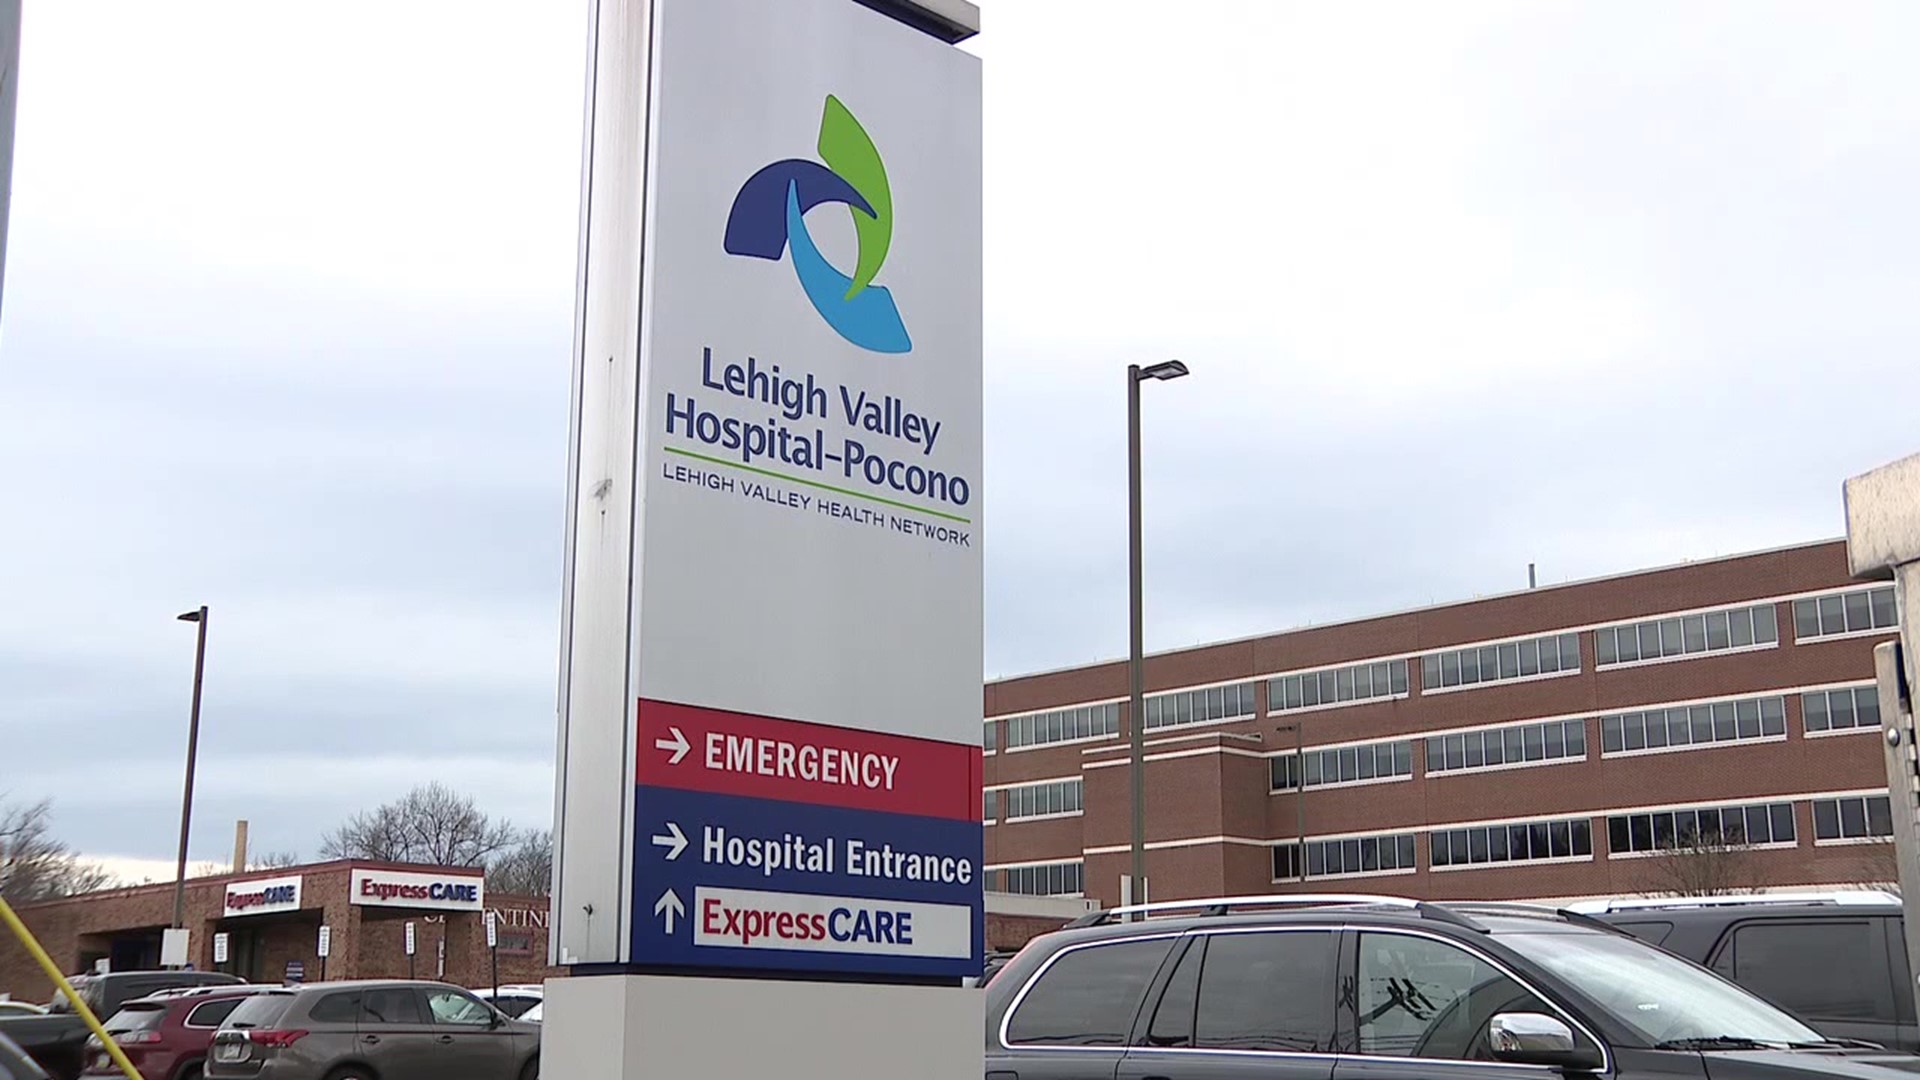 Newswatch 16 checked in with doctors at Lehigh Valley Hospital - Pocono to see what conditions are like this week at the medical facility in East Stroudsburg.